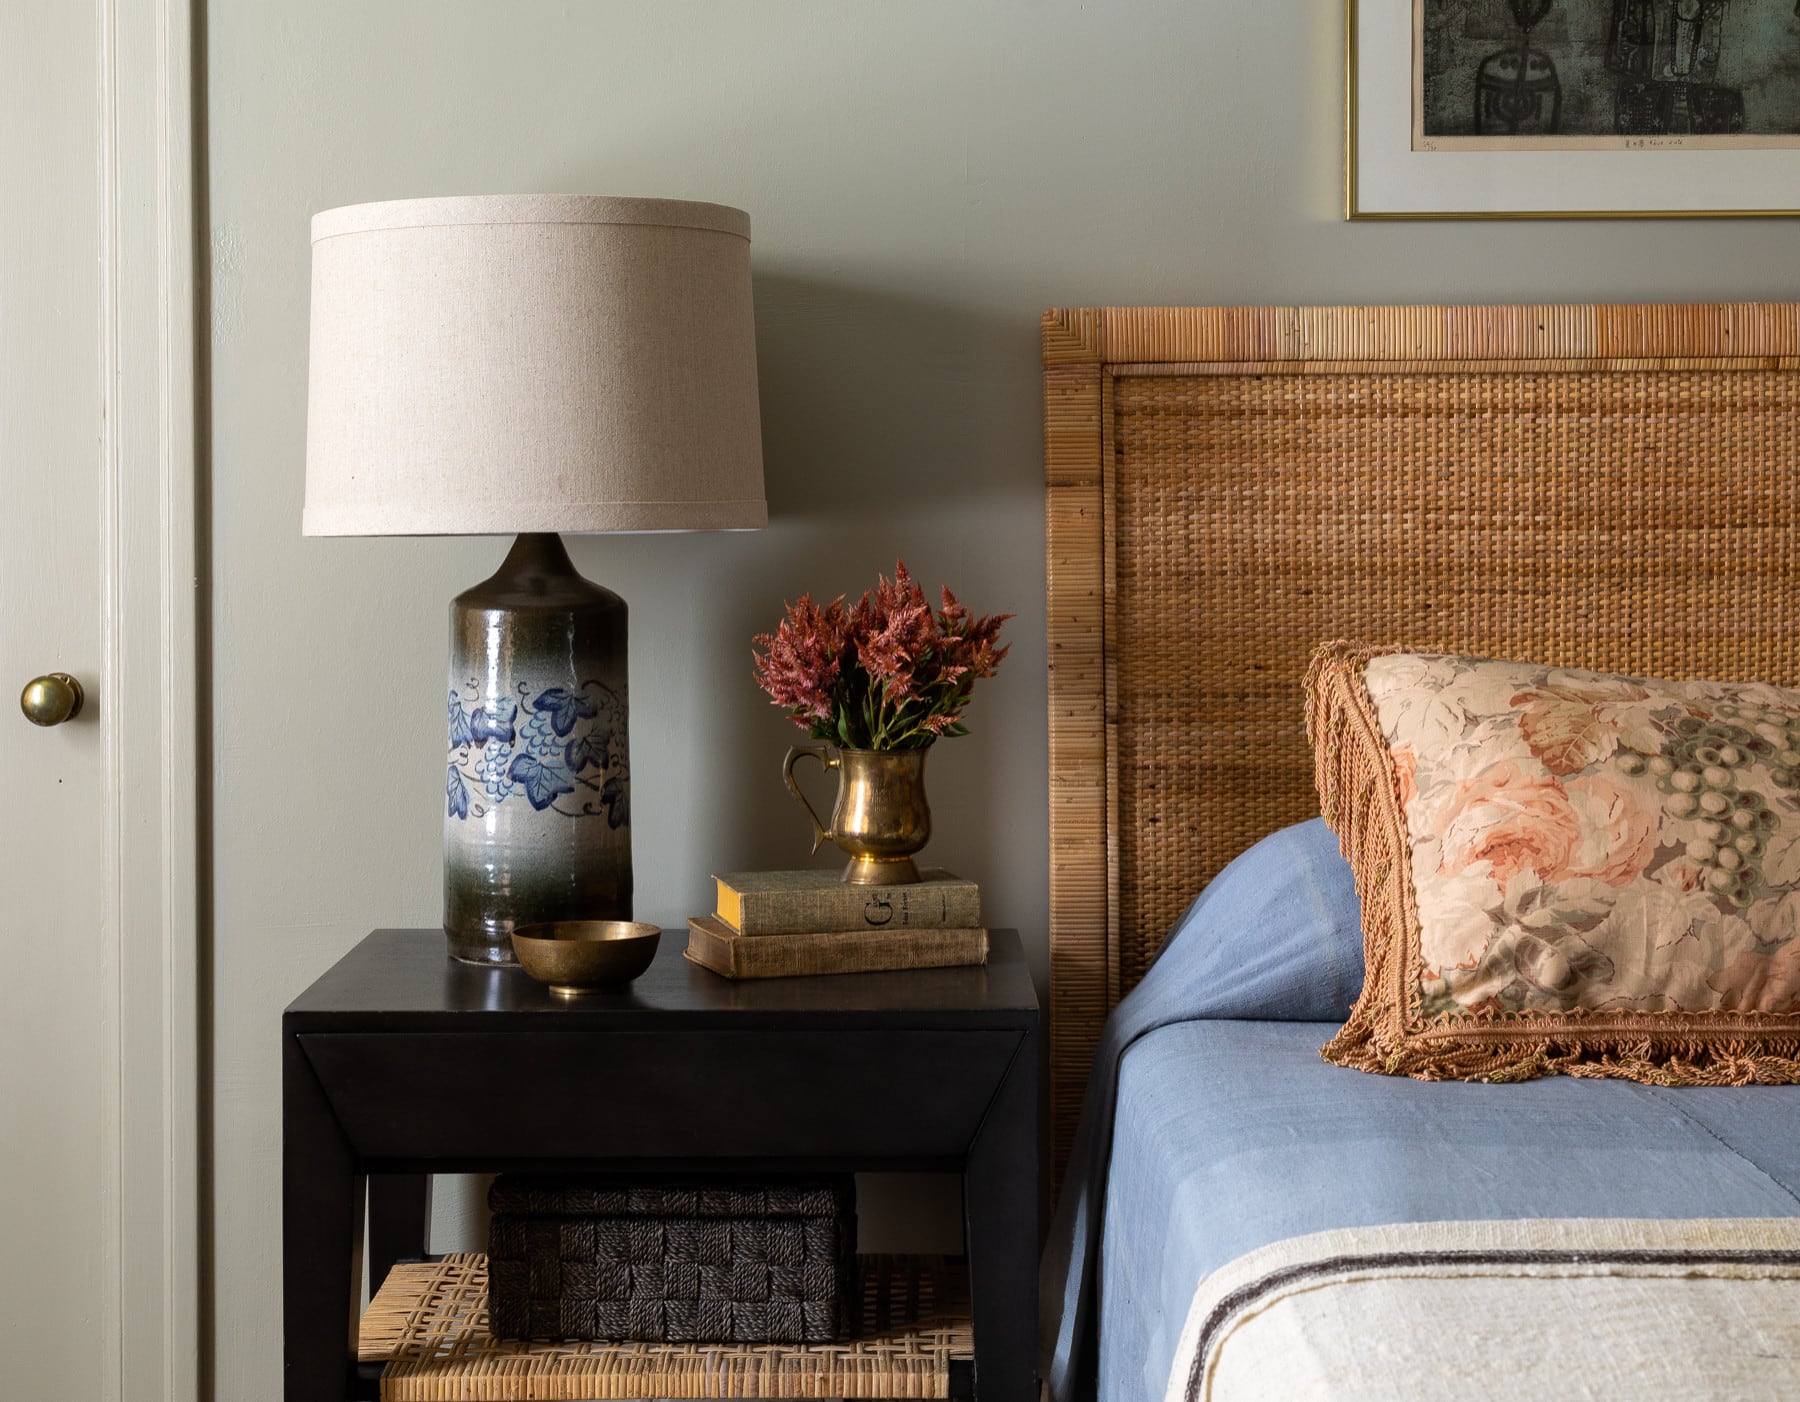 home tour featuring a bedroom with a vintage-inspired interior design, showcasing a rattan bedframe